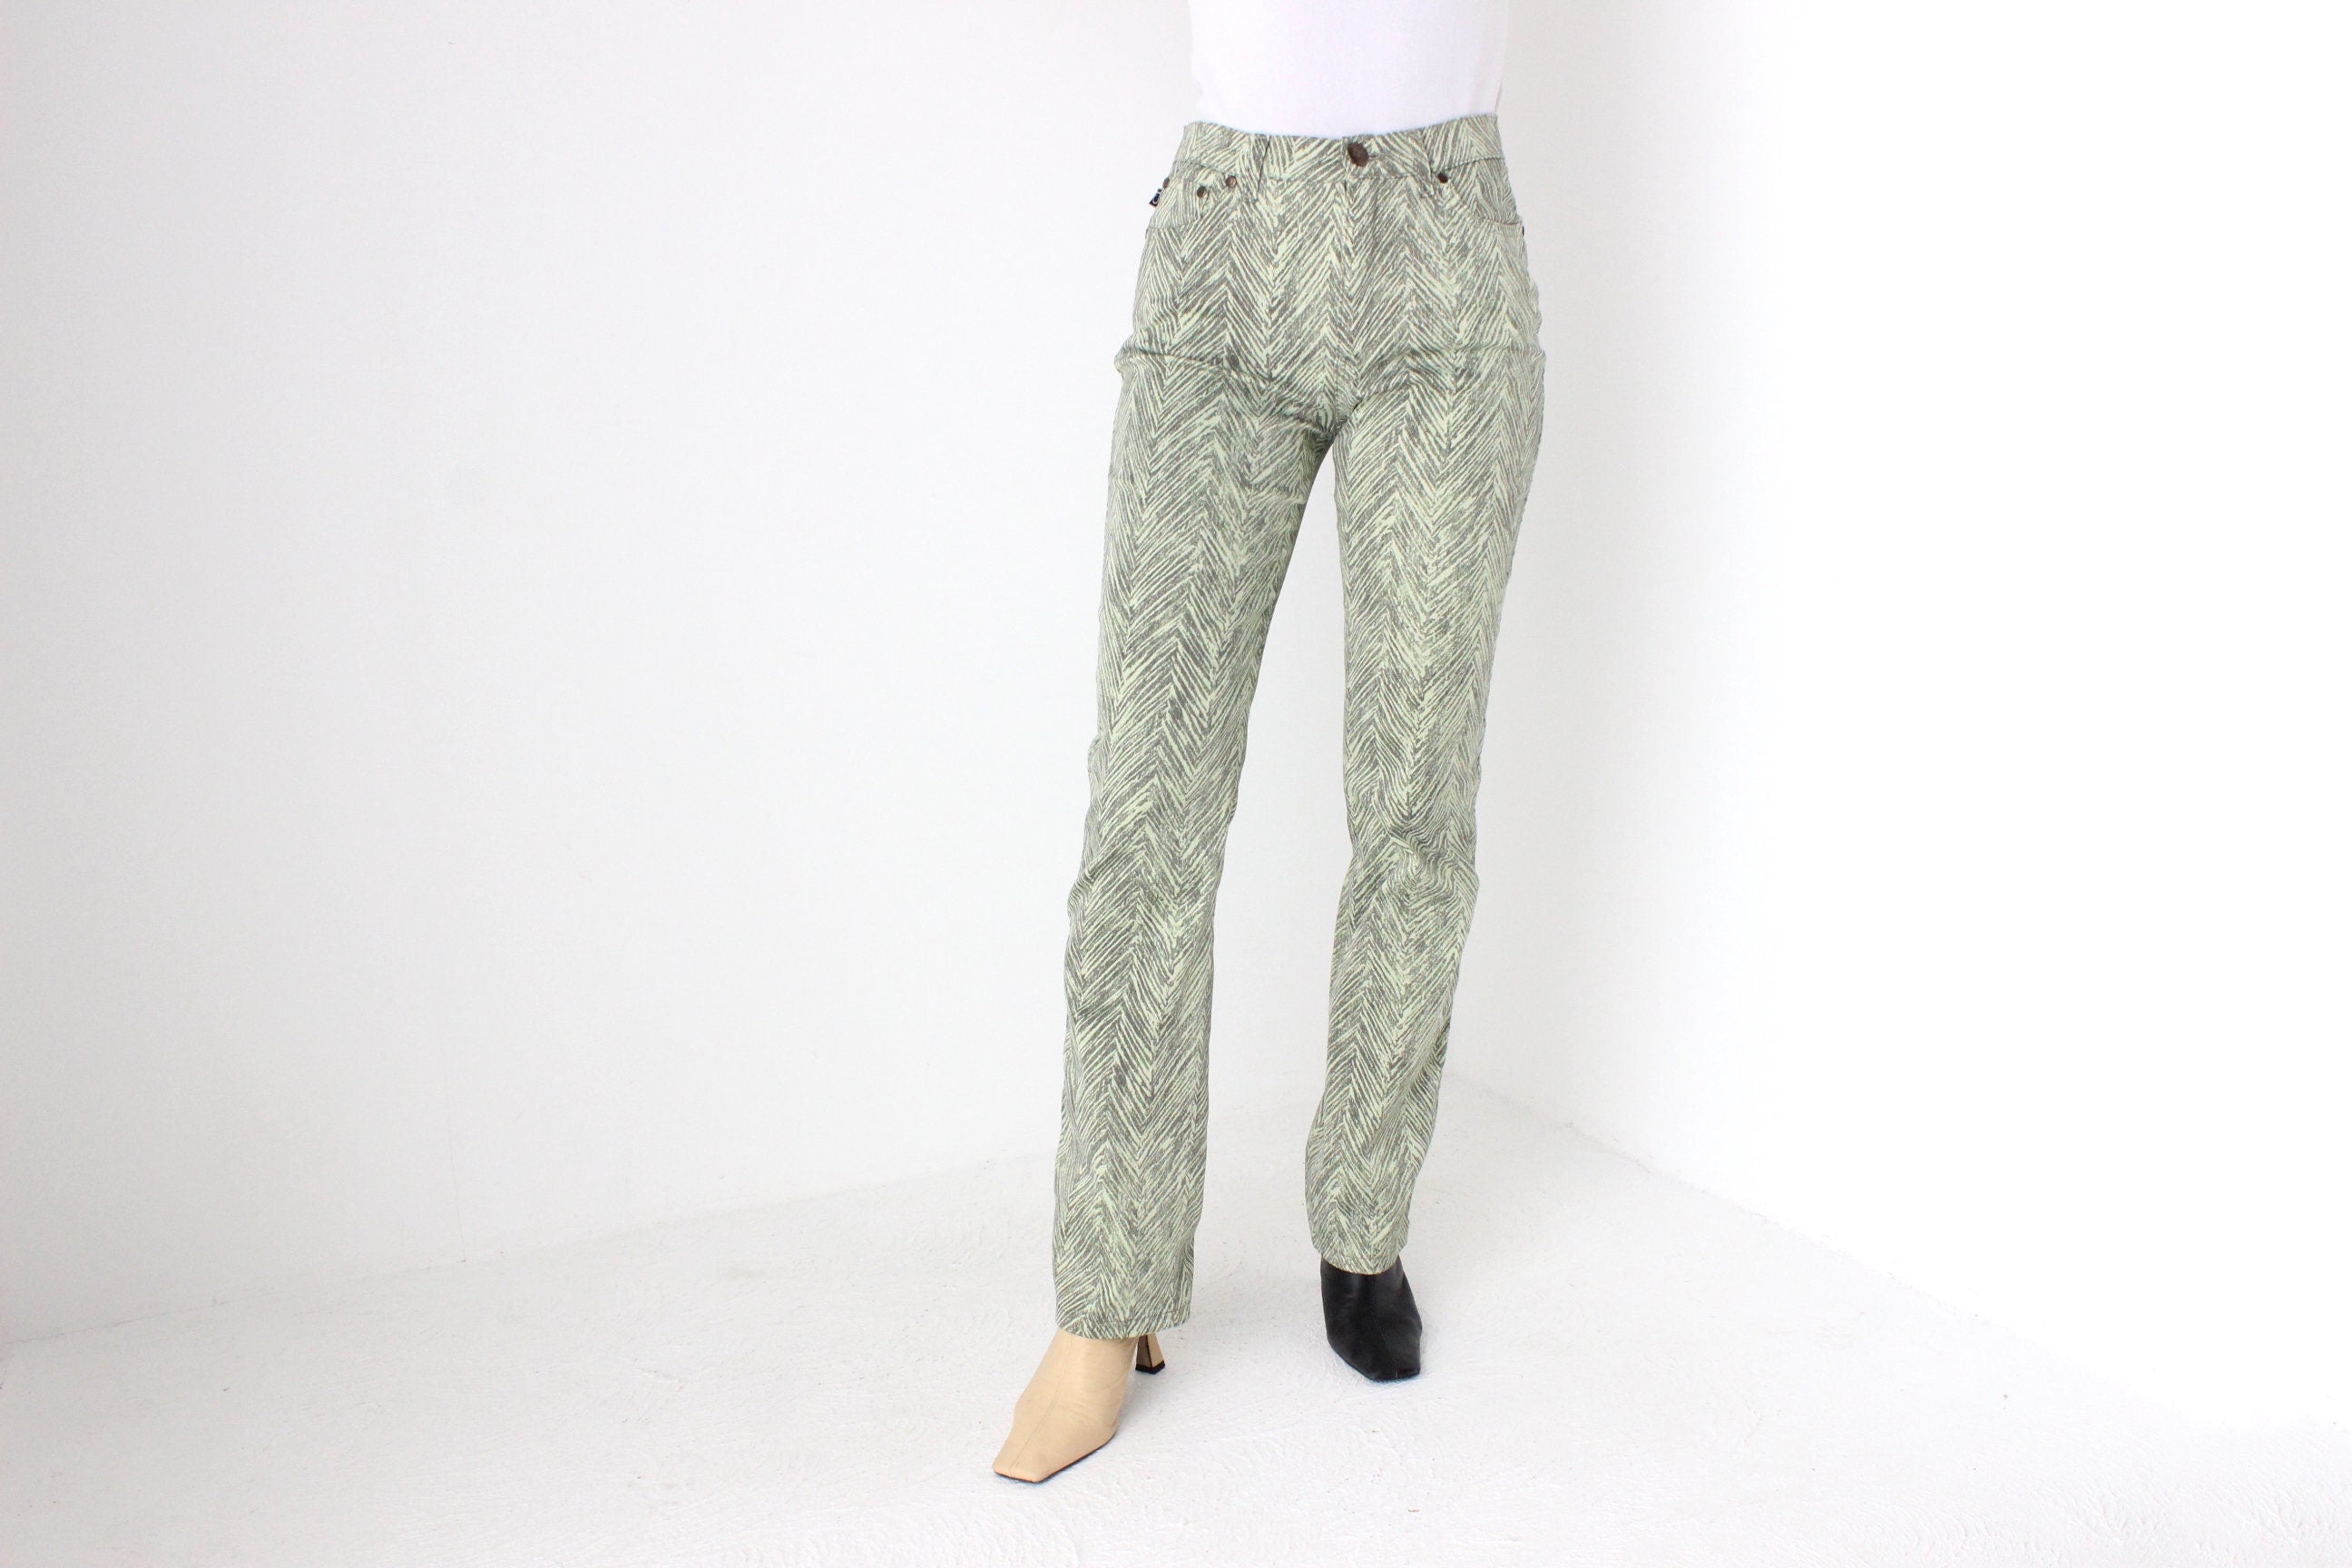 Y2K Roberto Cavalli "Cavalli Jeans" Lime Tiger Synthetic Bootcut Club Pants